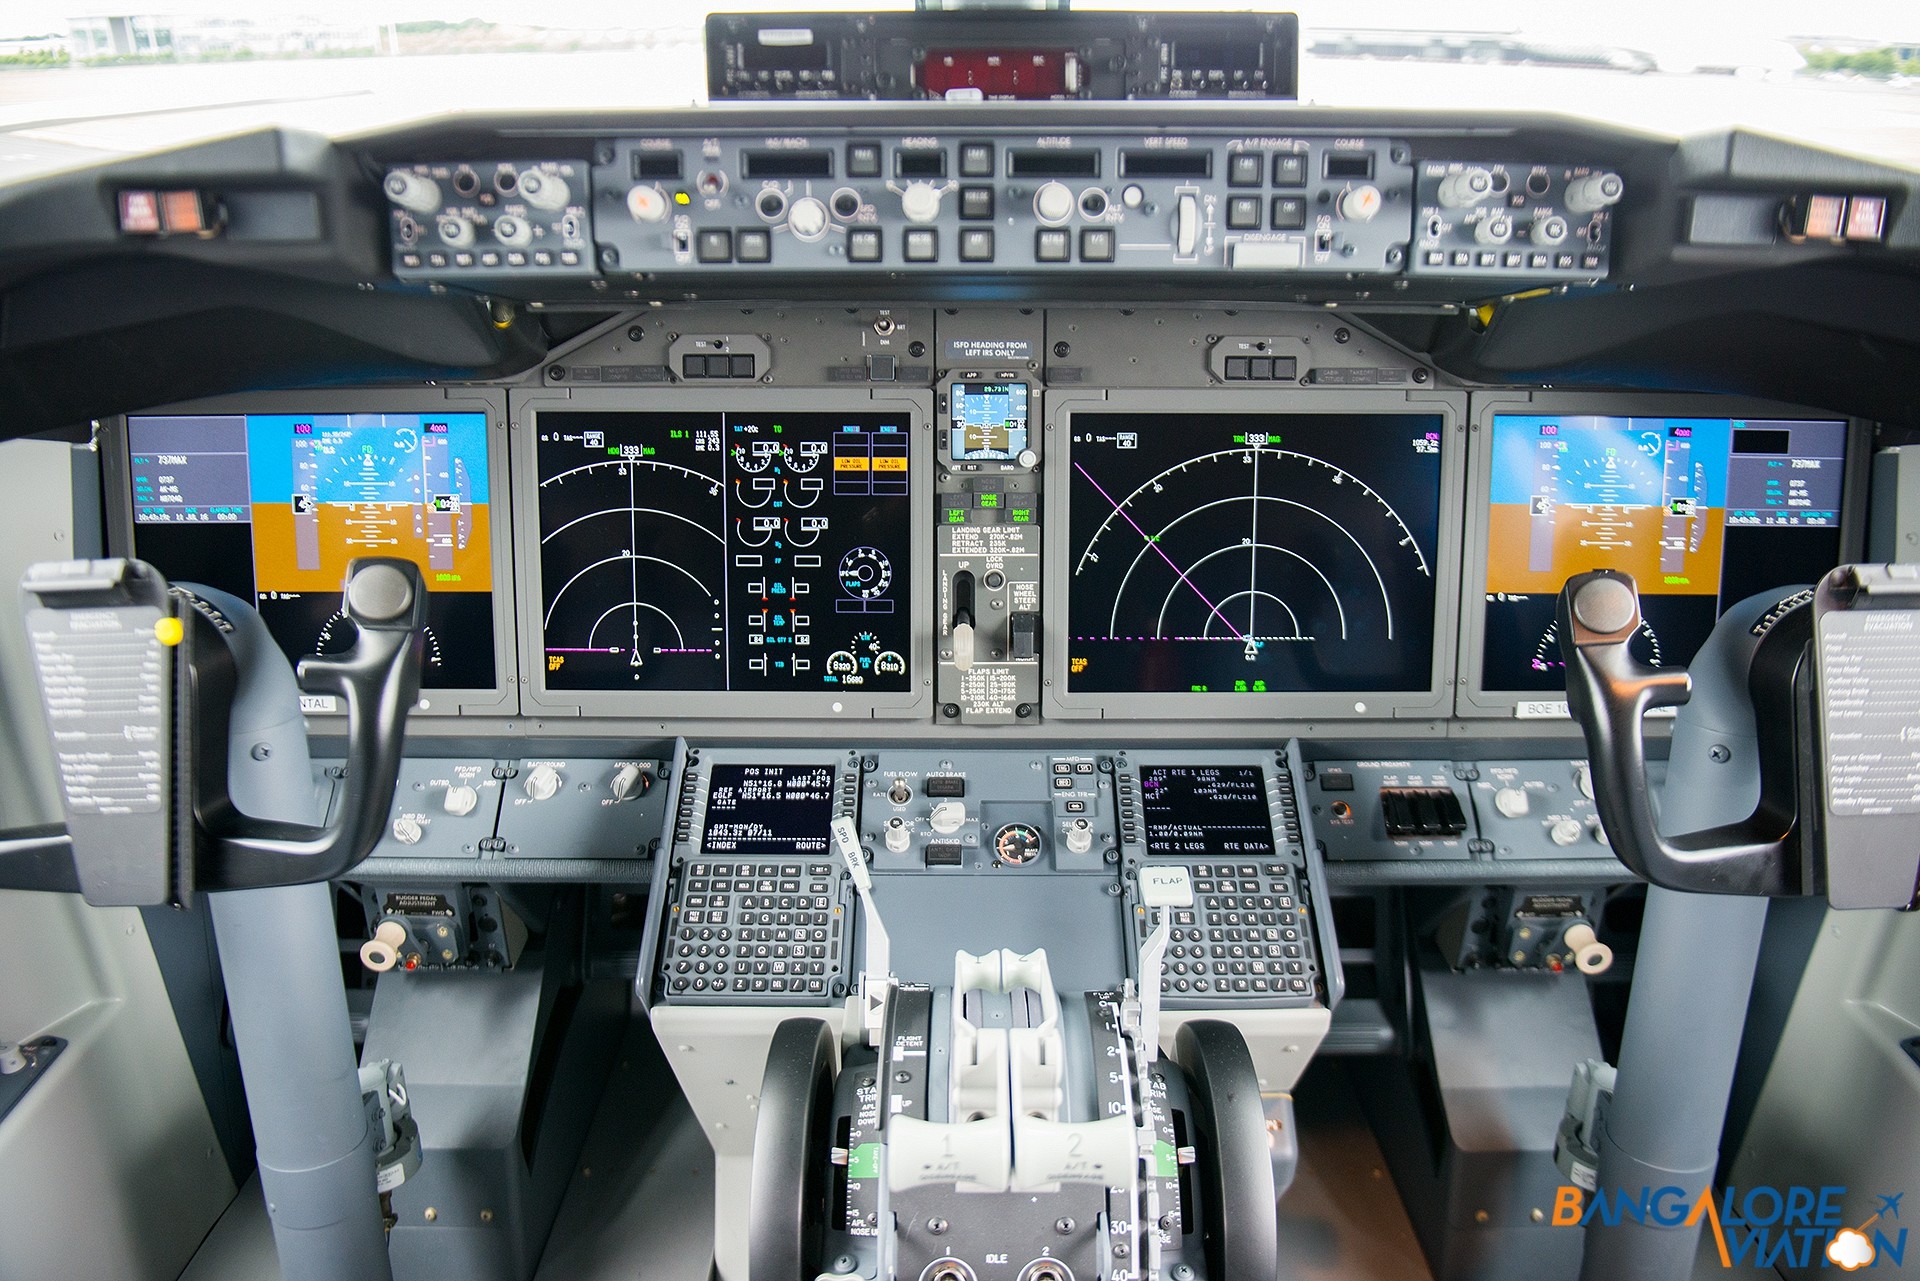 1920x1281 The new flightdeck with Large Format Displays.